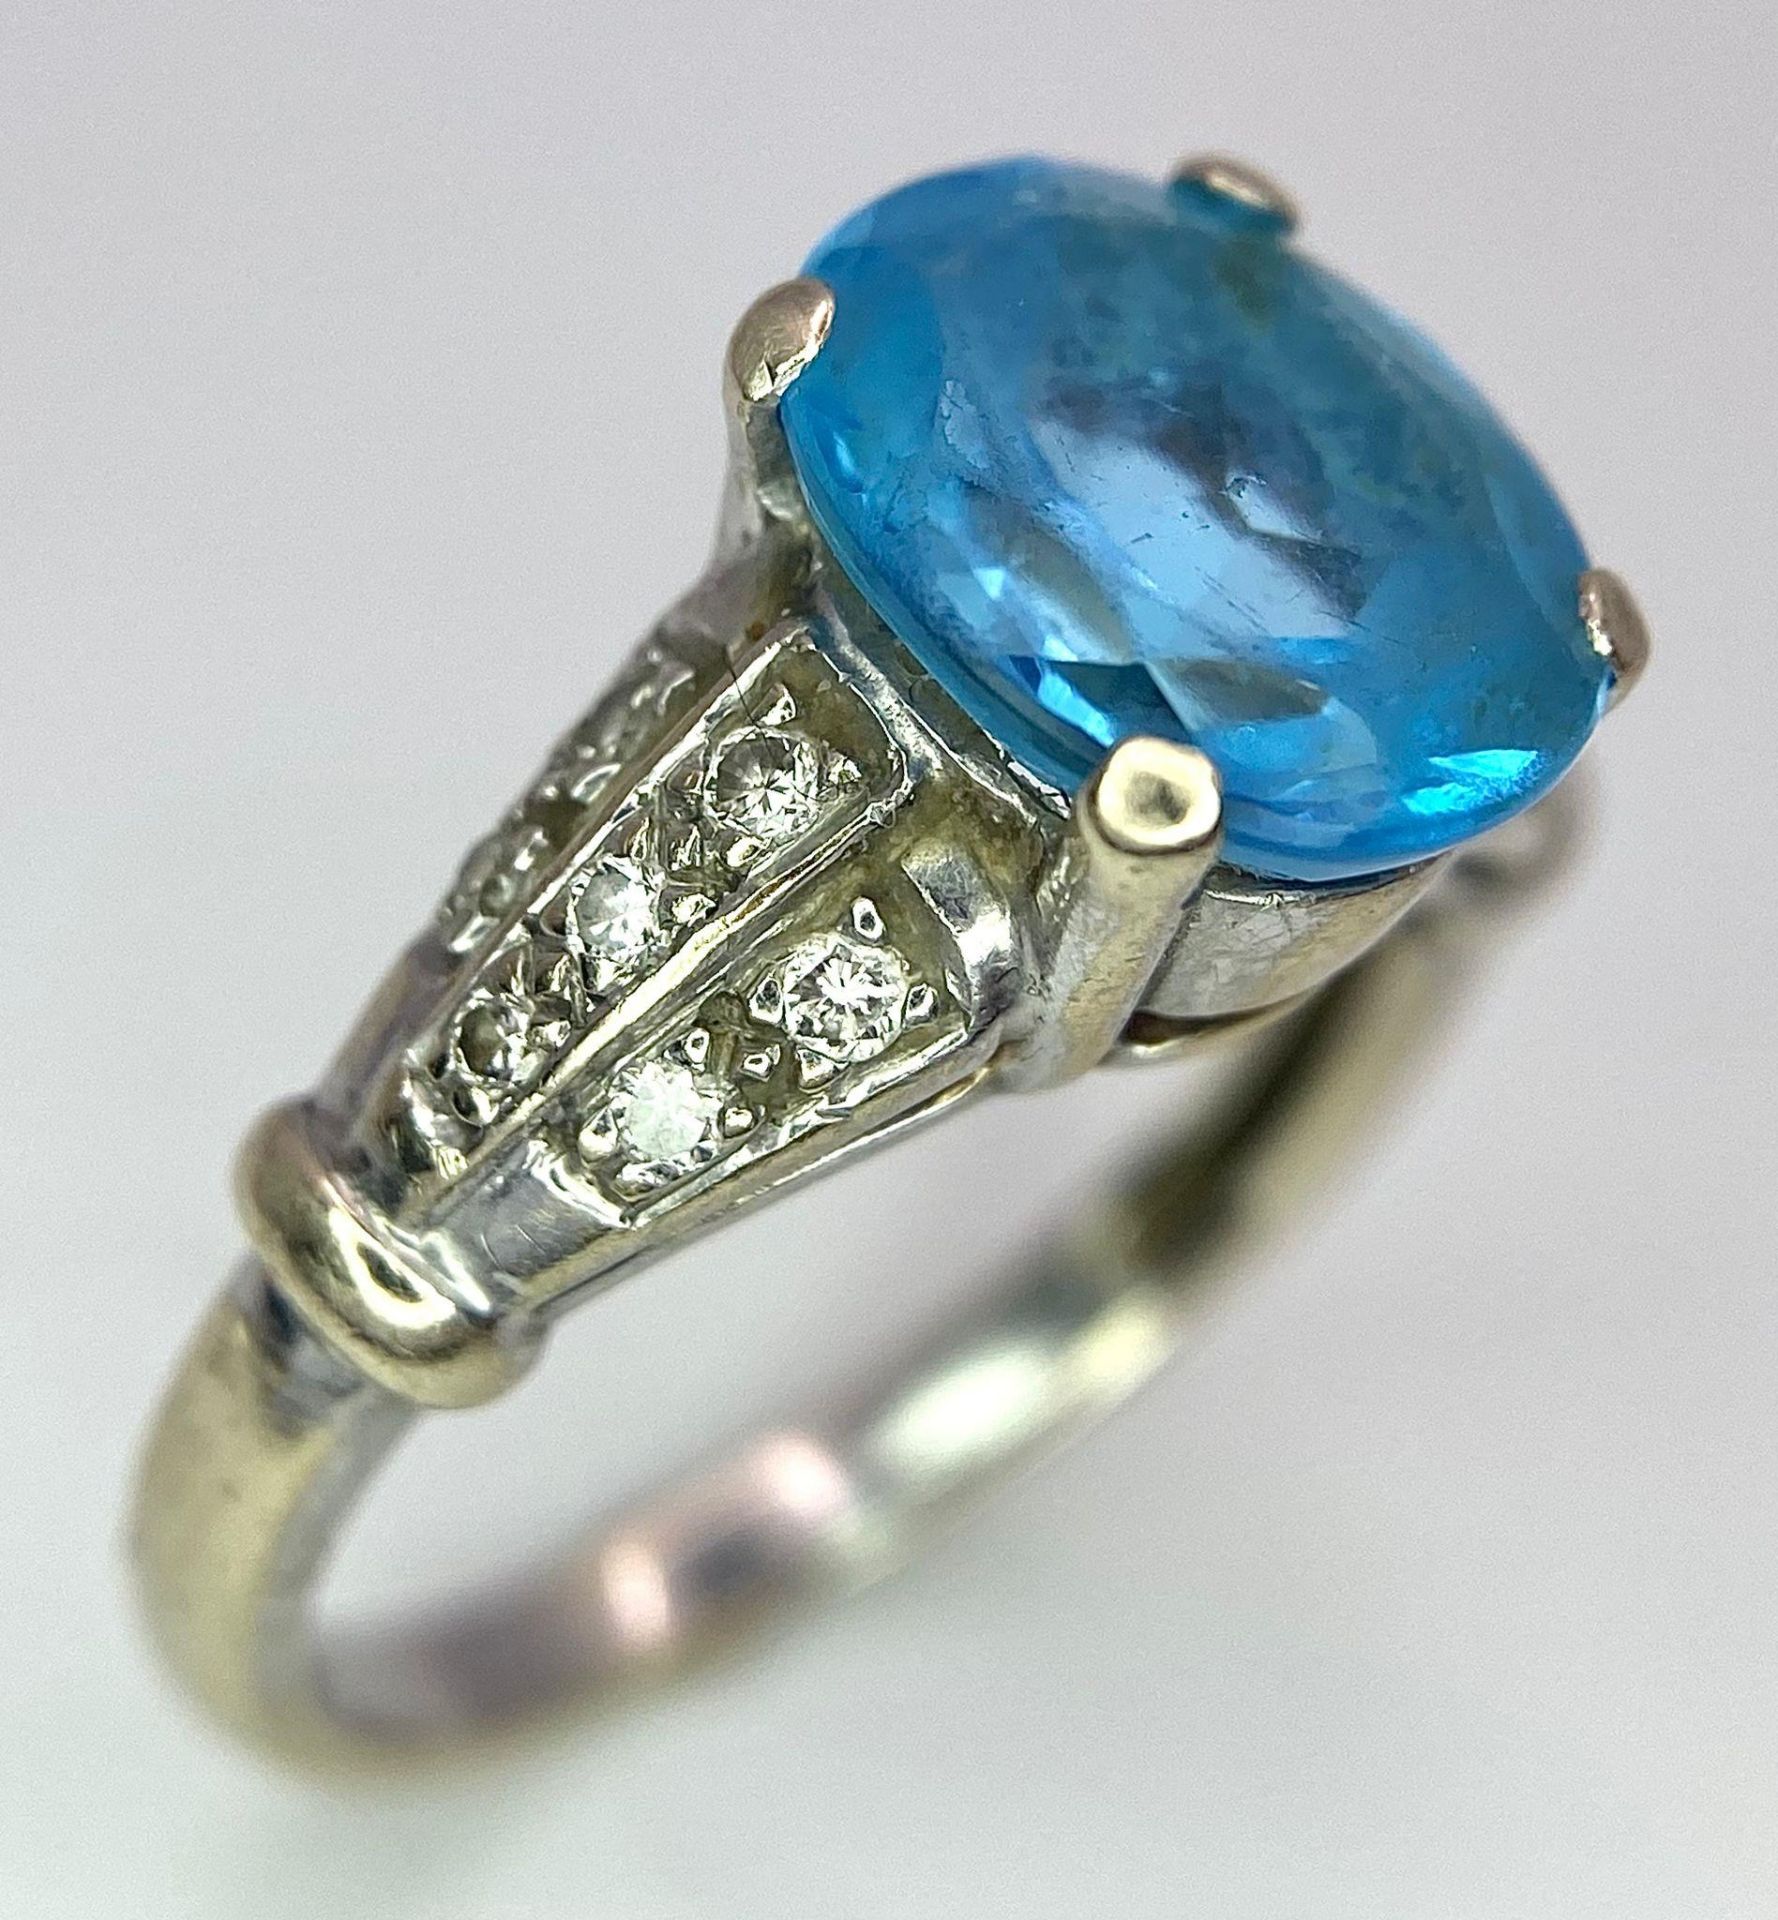 A vintage, 9 K white gold ring with a large, oval cut, vivid blue aquamarine and three bands of - Image 2 of 5